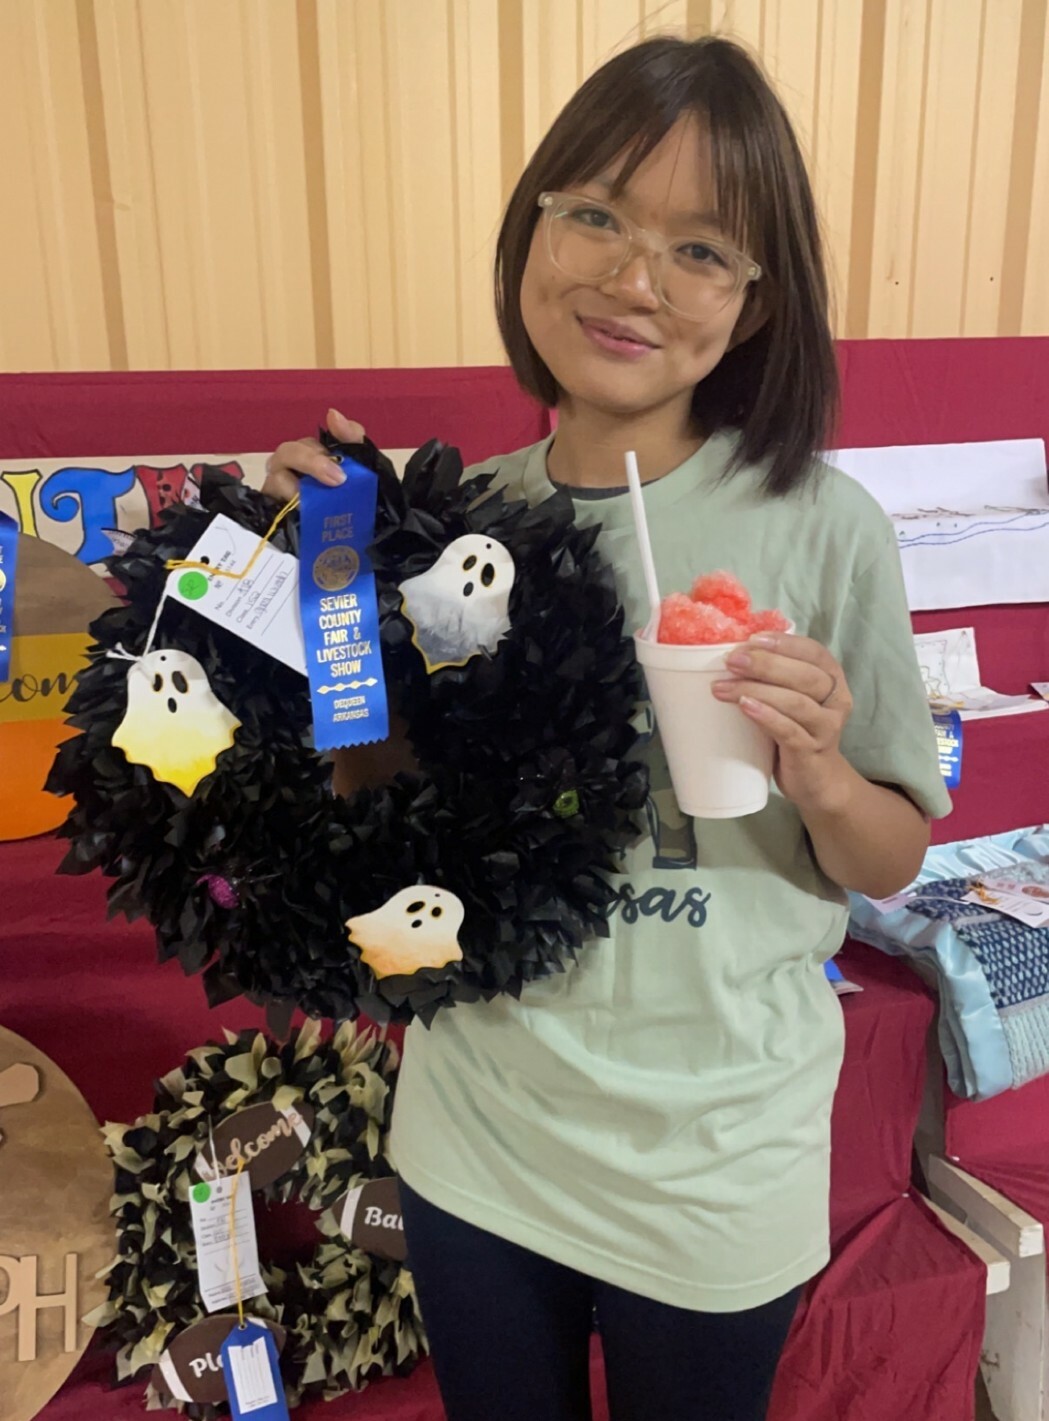 Audrey Winning Wreath At The County Fair1